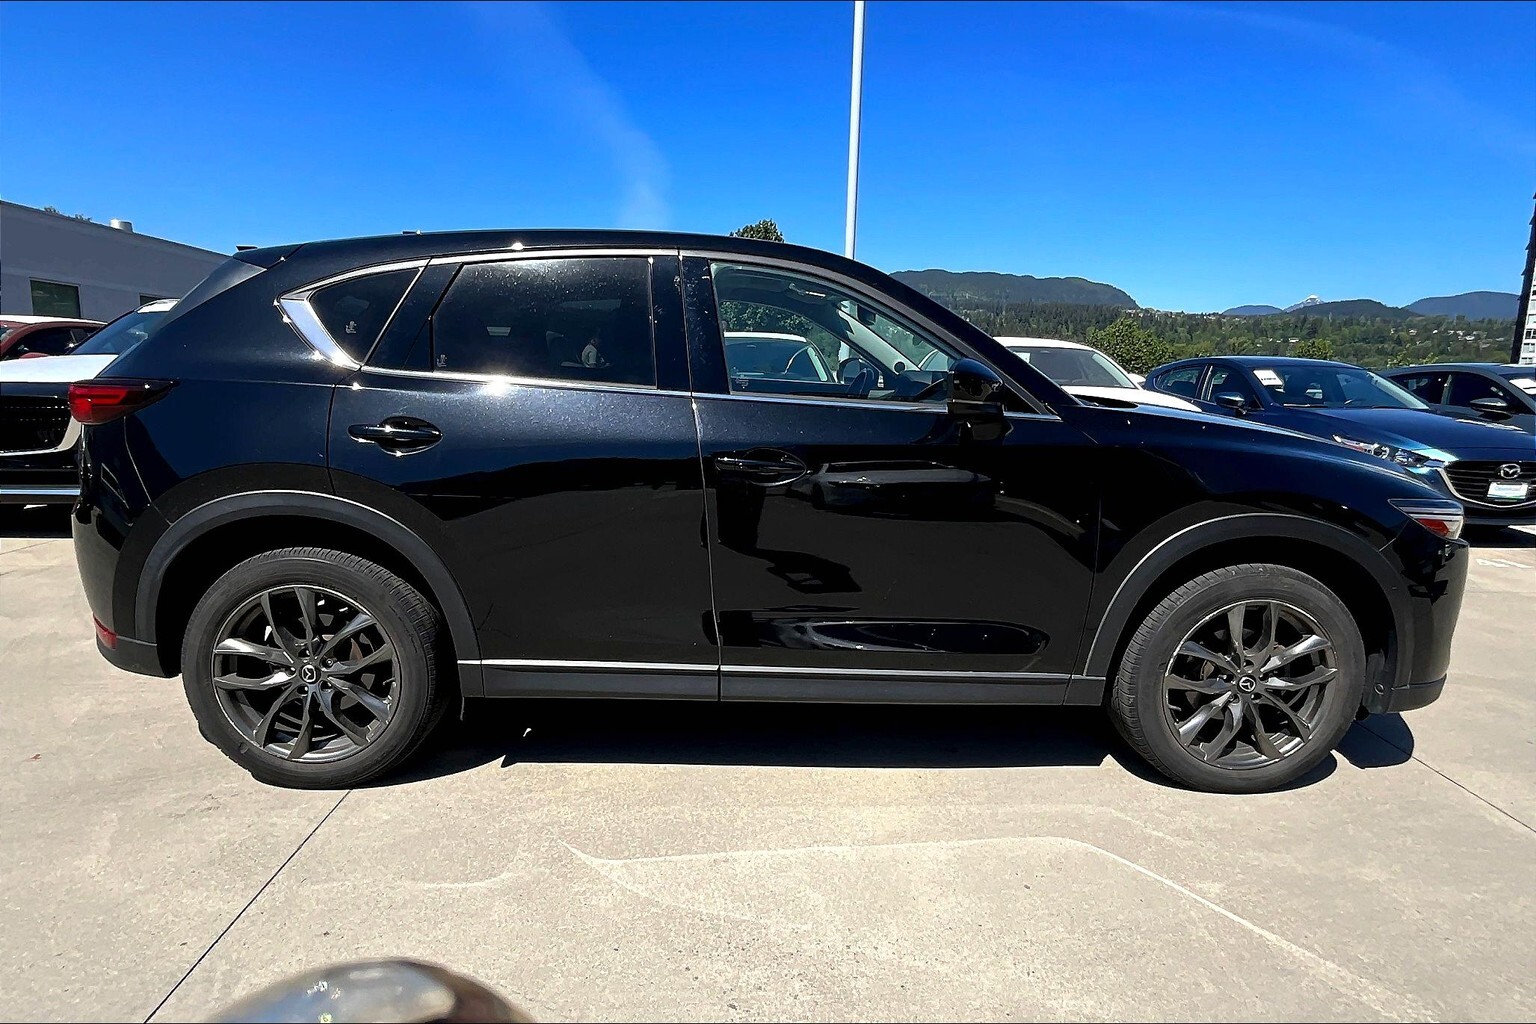 2021 Mazda CX-5 GT AWD 2.5L I4 CD at TOP OF LINE|ONE OWNER|NO ACCI